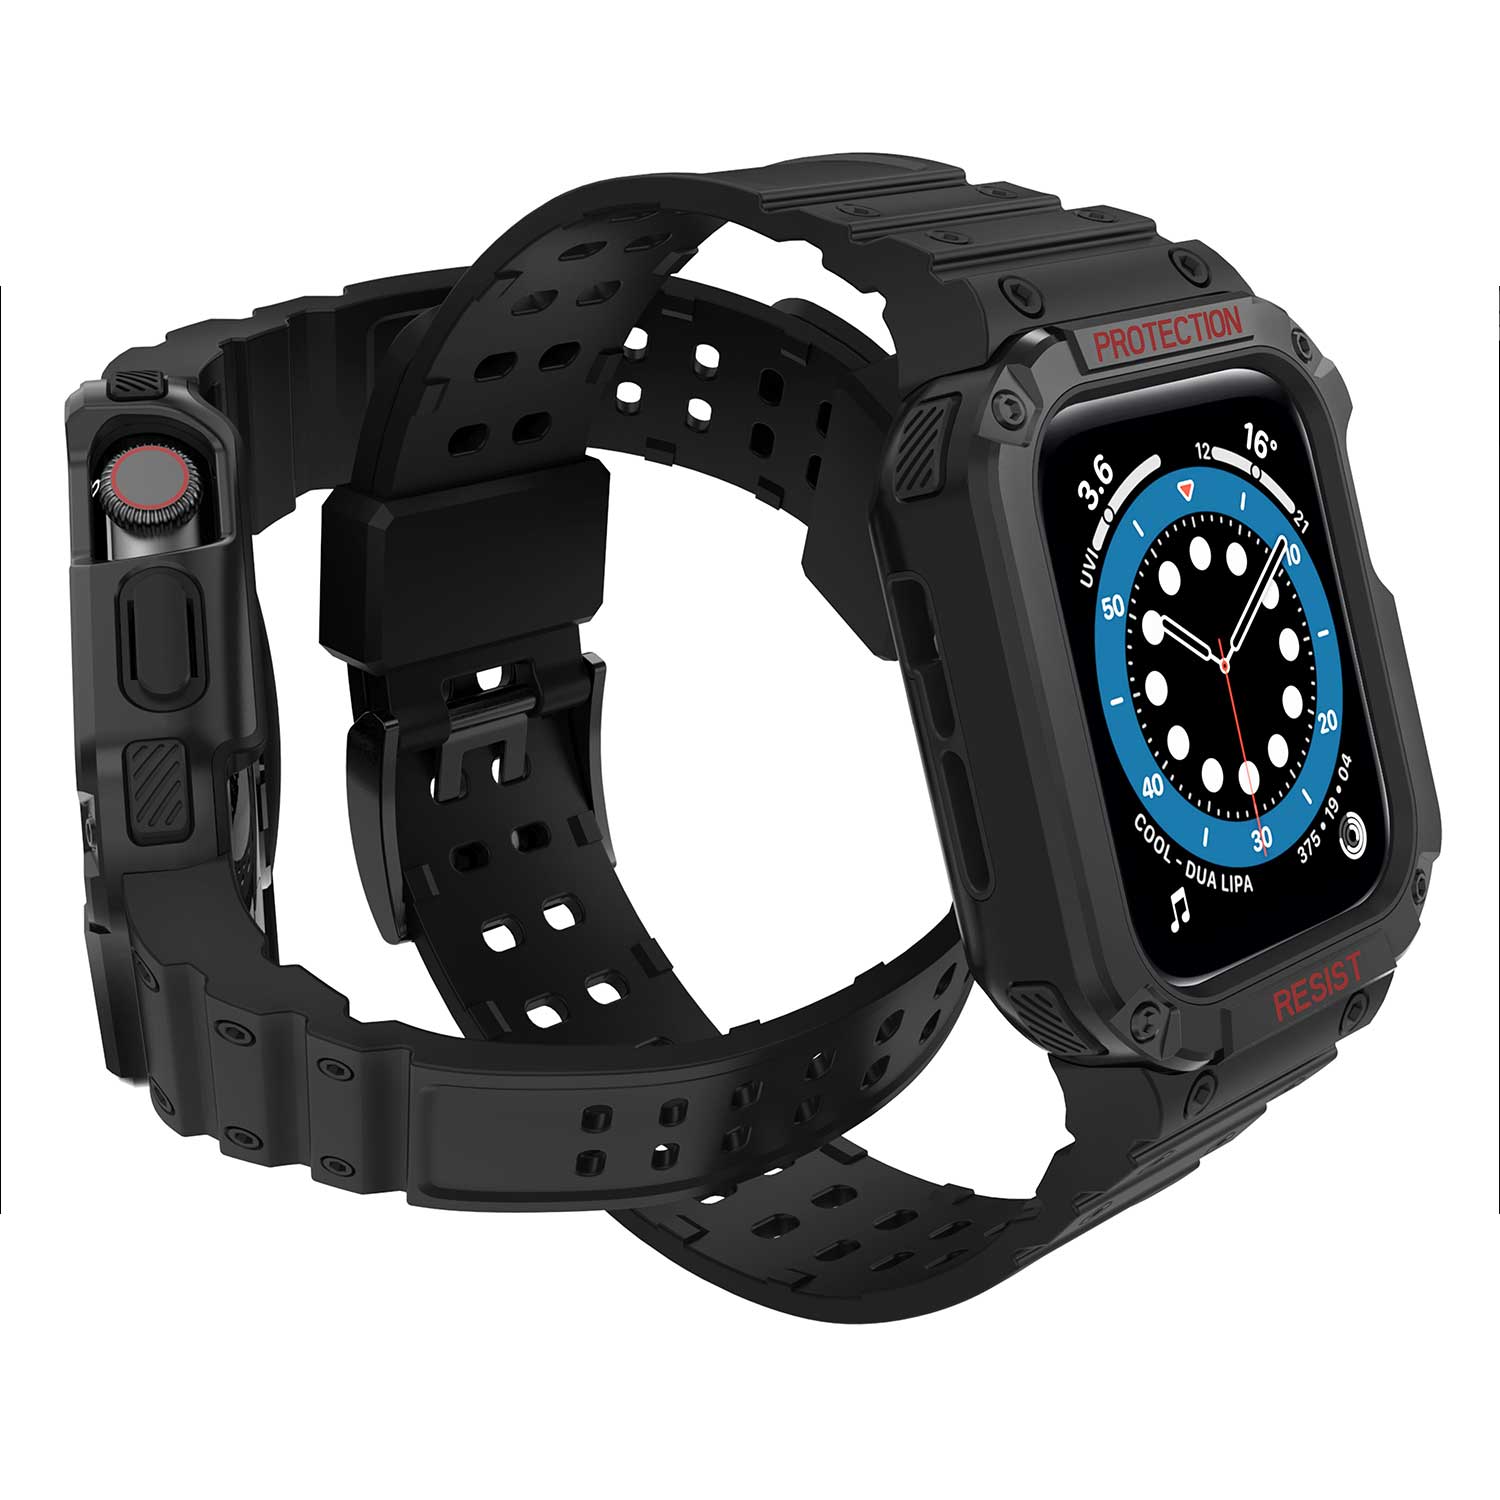 Tough On Apple Watch Band with Case Series 4 / 5 / 6 / SE 44mm Rugged Protection Black/Black